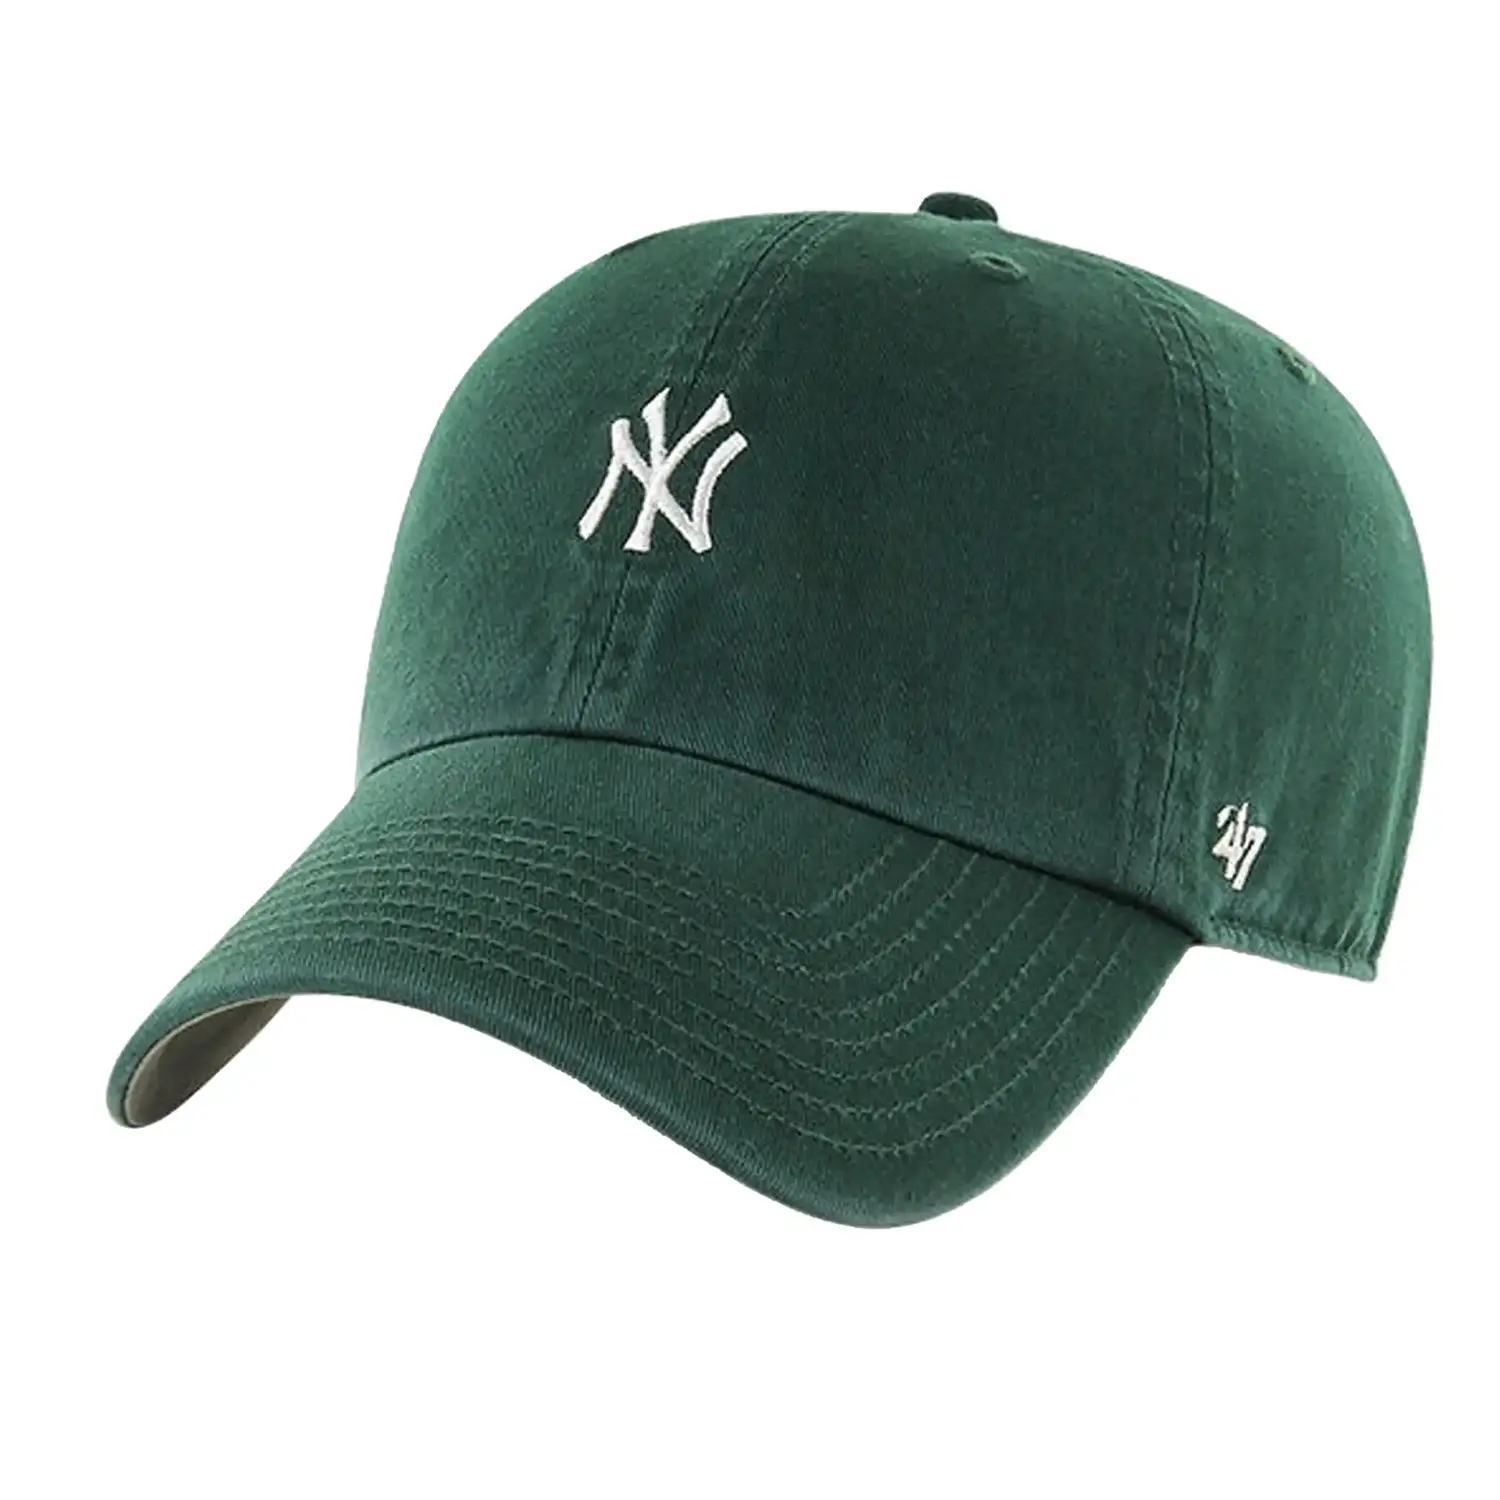 47 Brand MLB NY Yankees baseball cap in forest green with small logo